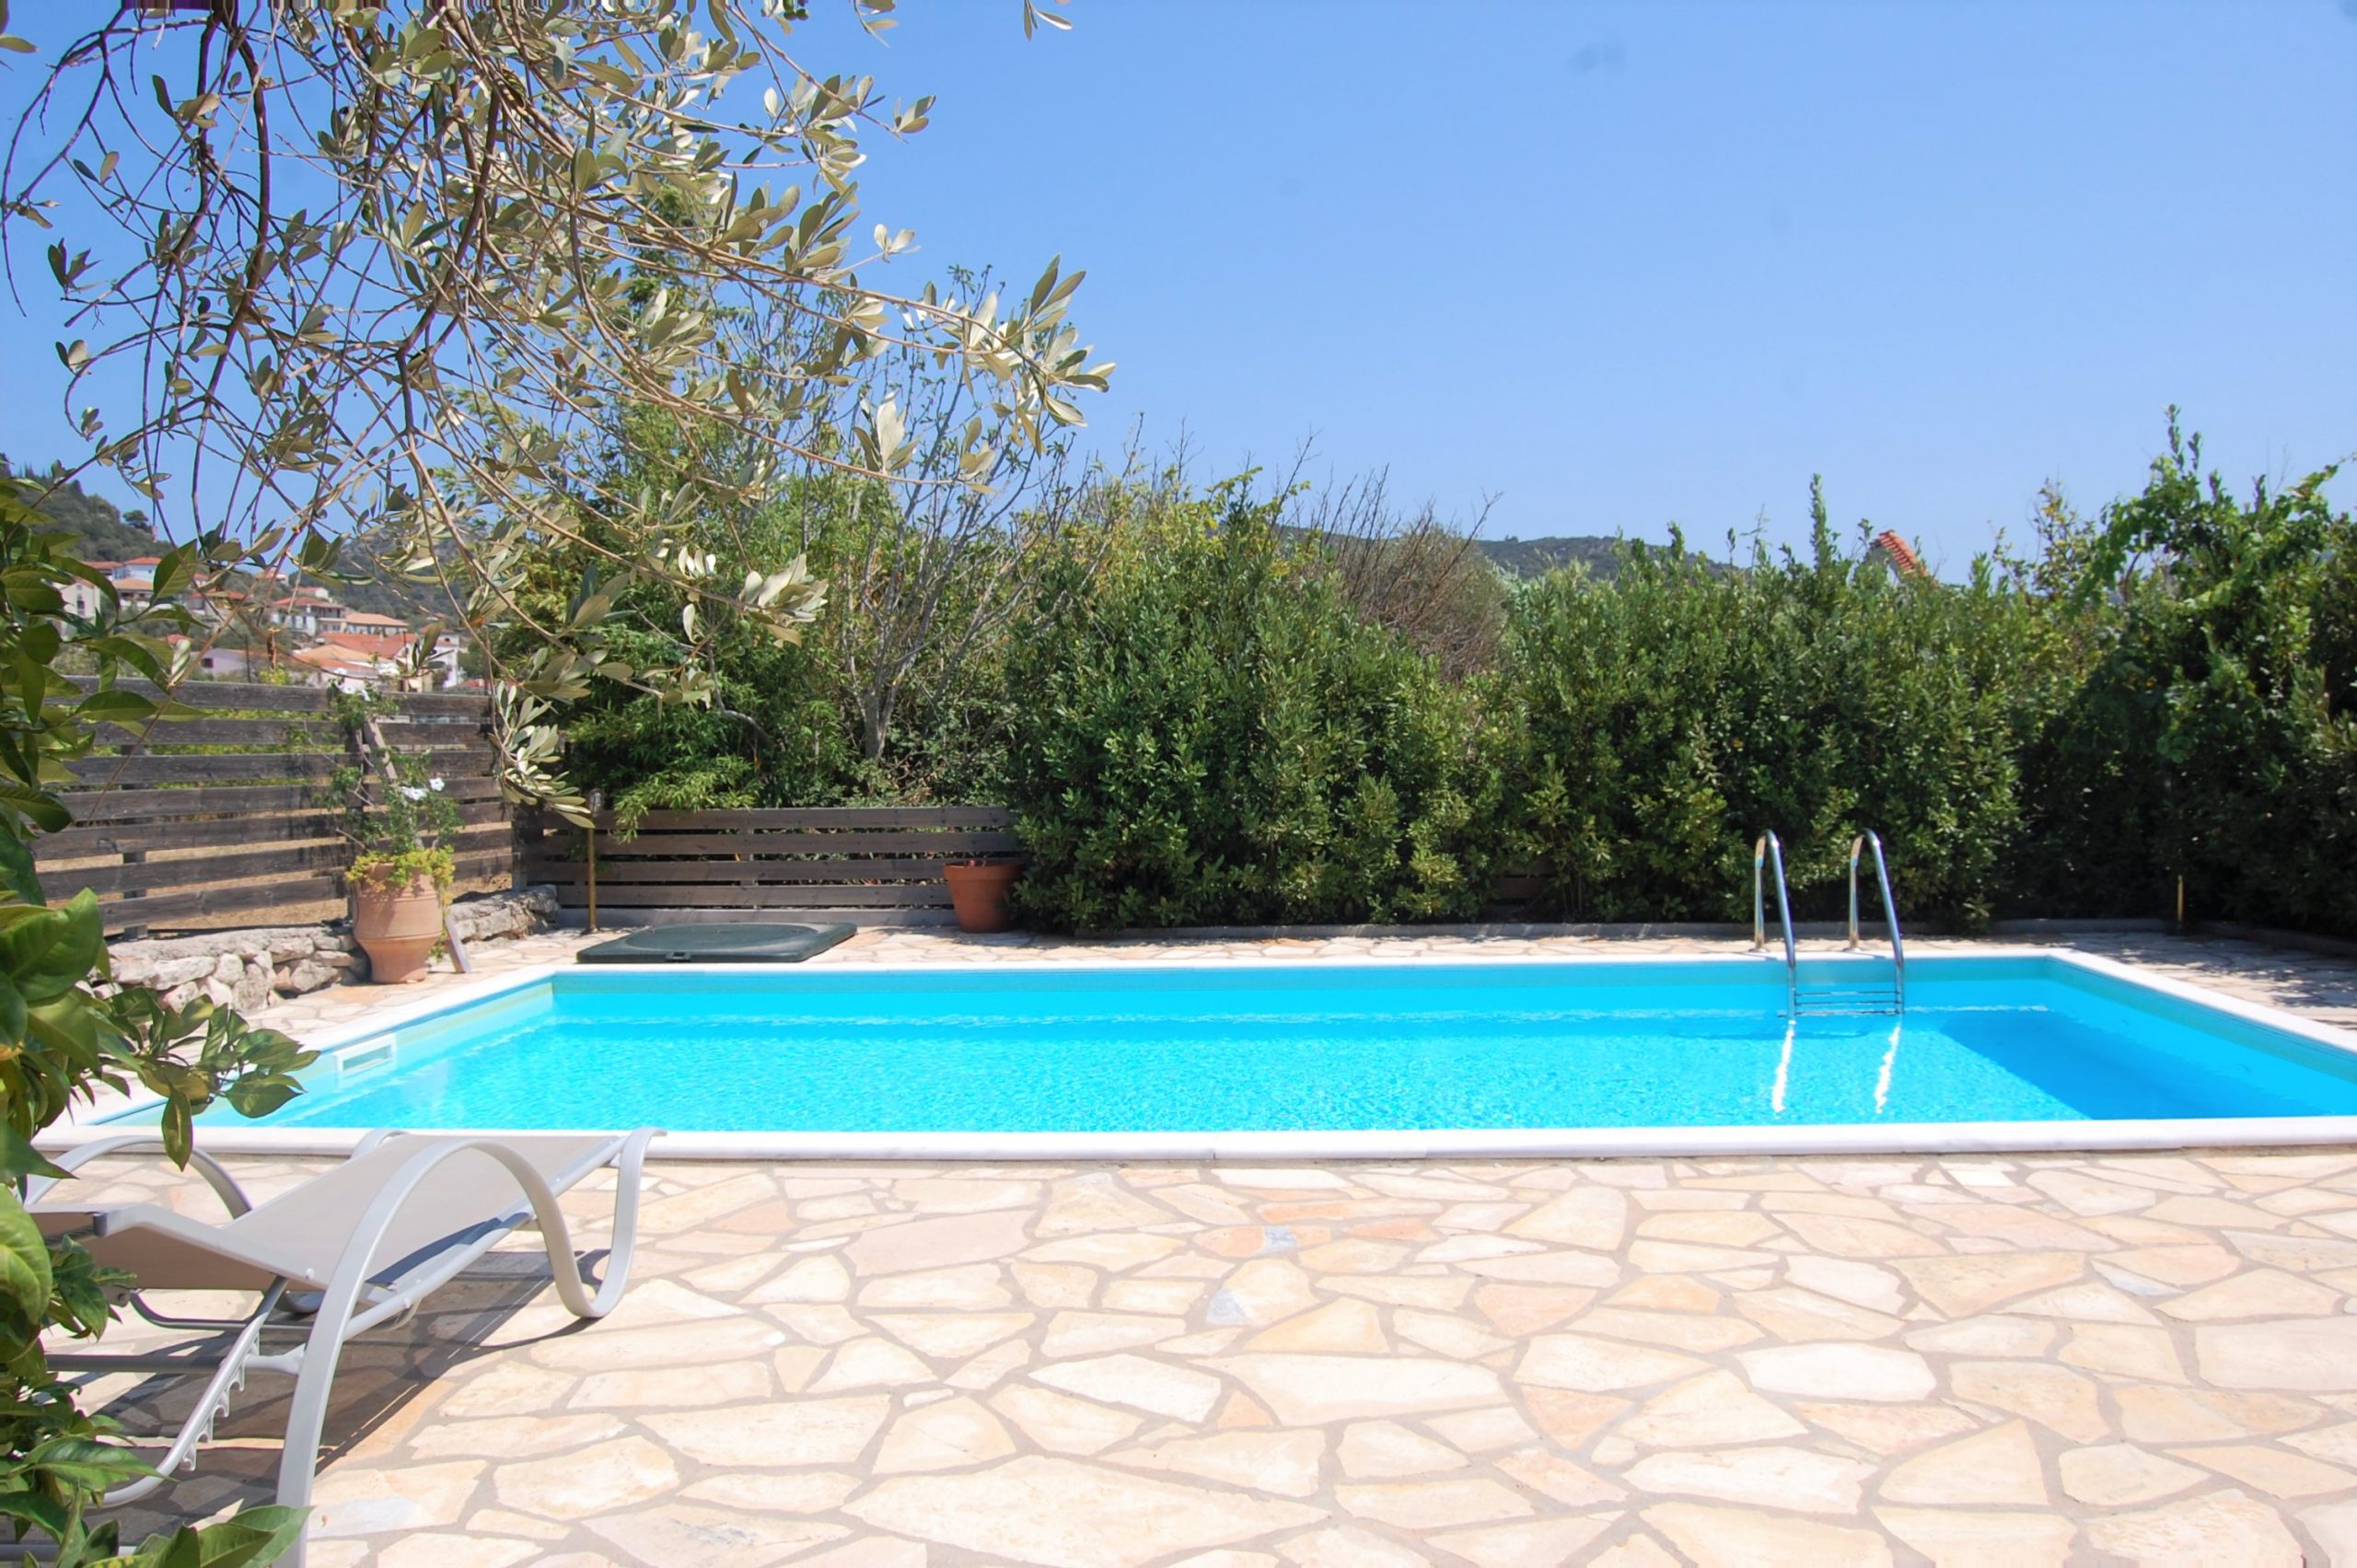 Swimming pool of house for rent in Ithaca Greece, Vathi